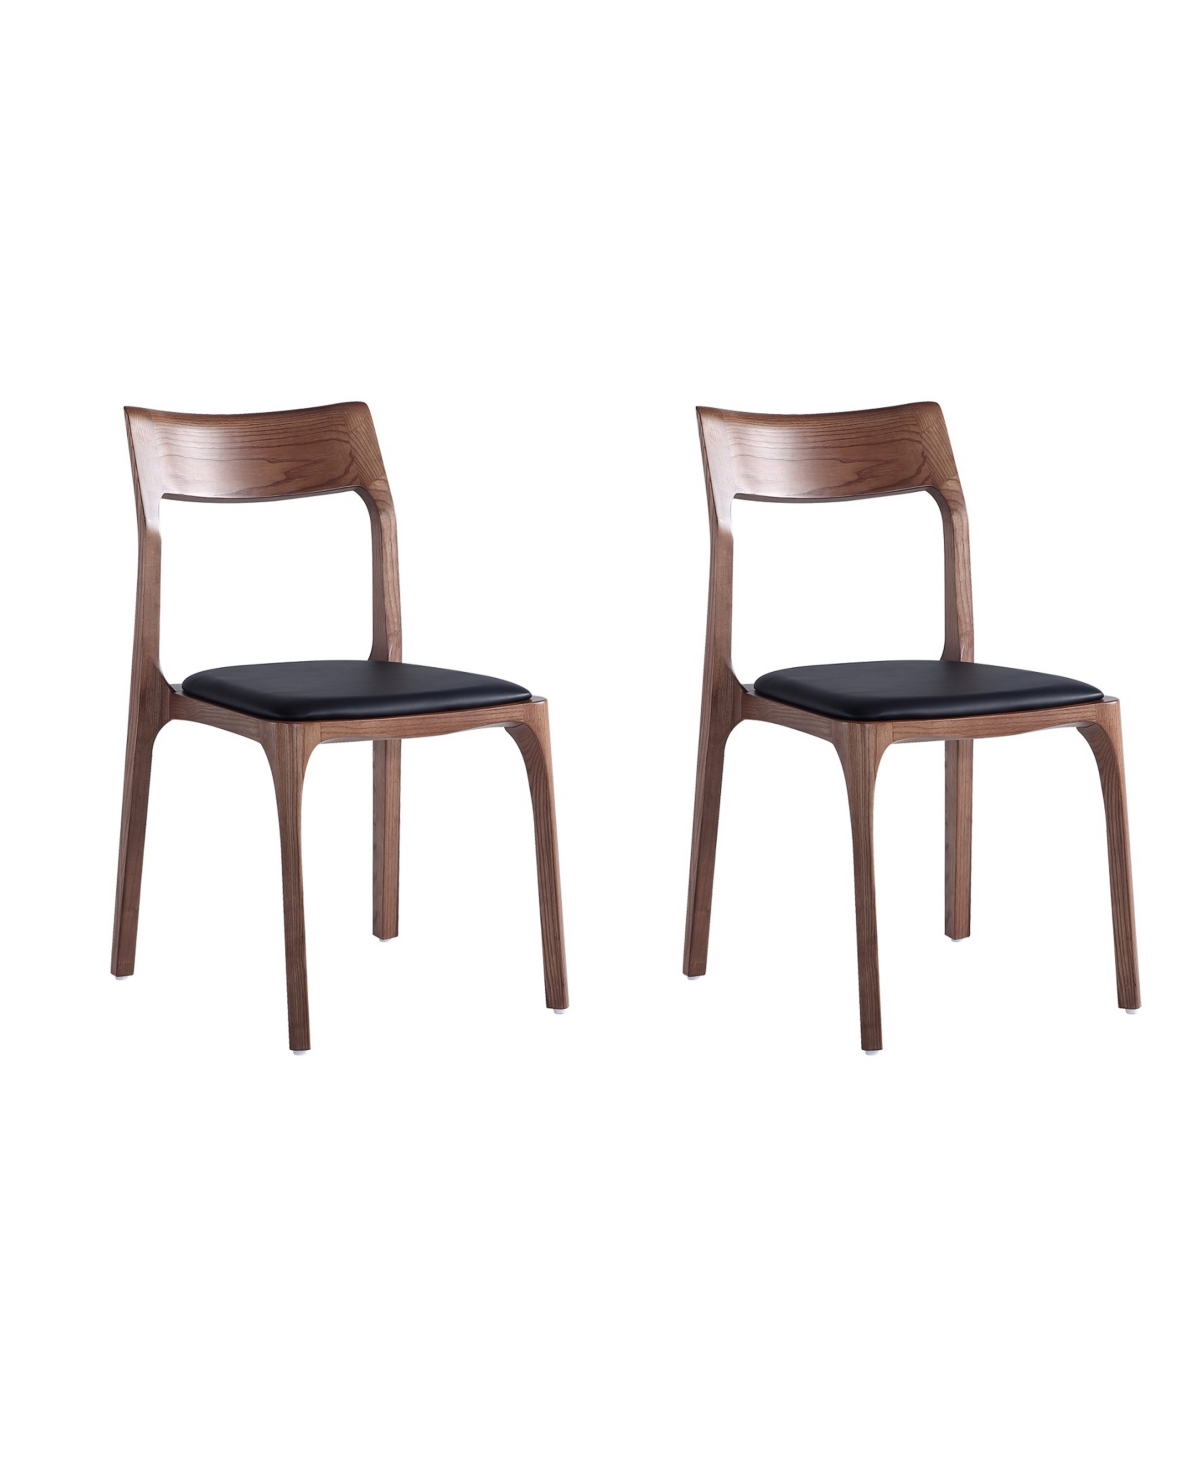 Manhattan Comfort Moderno 2-piece Faux Leather Upholstered Stackable Dining Chair Set In Walnut And Black